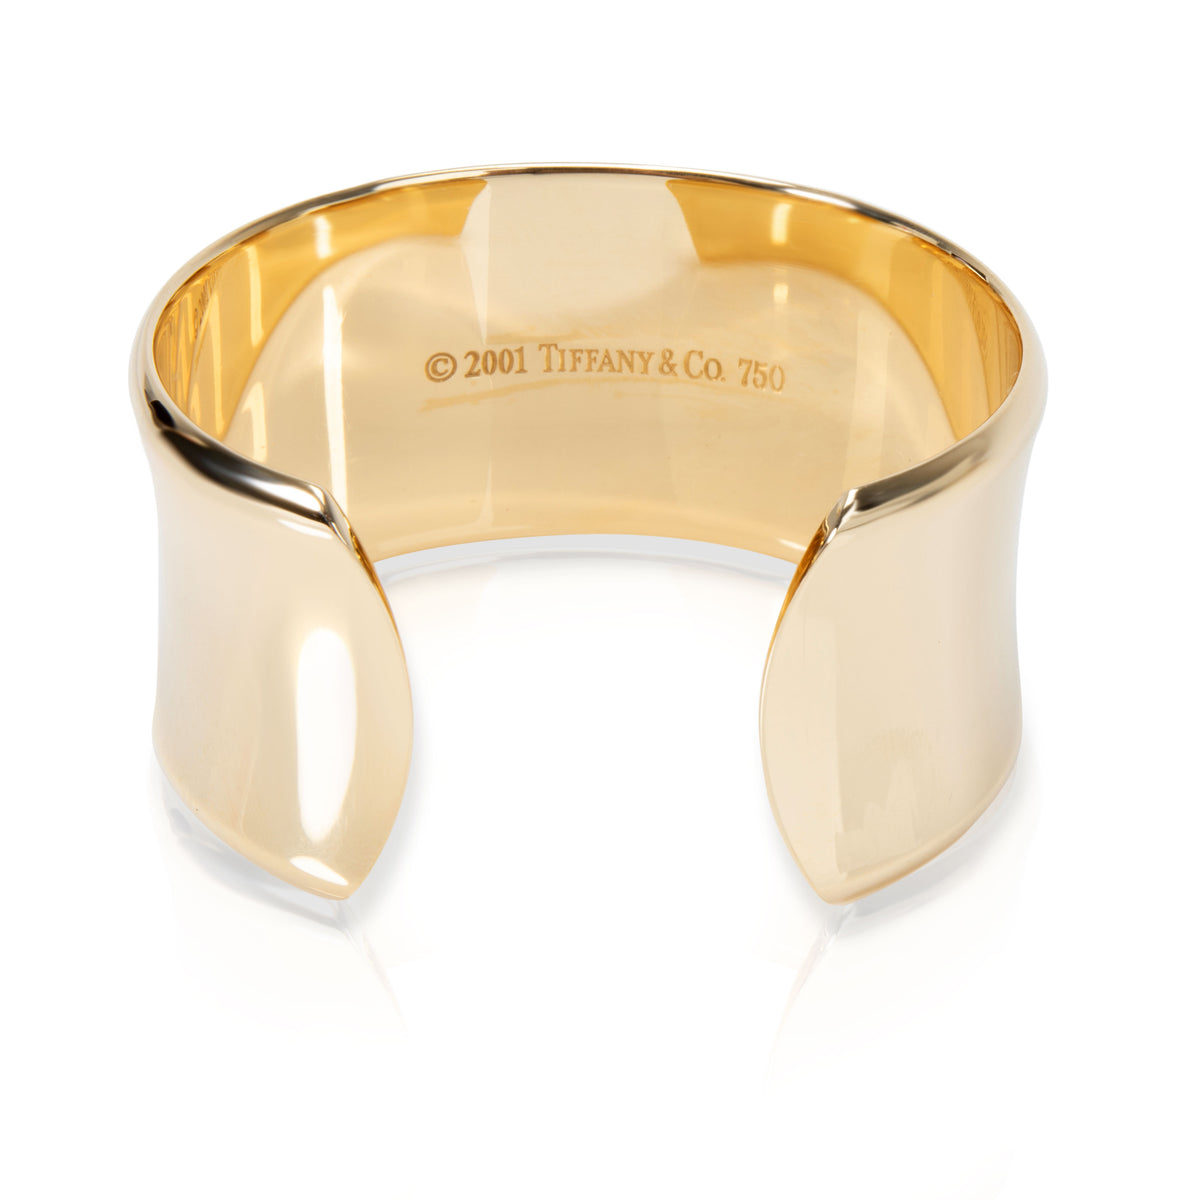 Tiffany & Co. 1837 Wide Cuff in 18K Yellow Gold